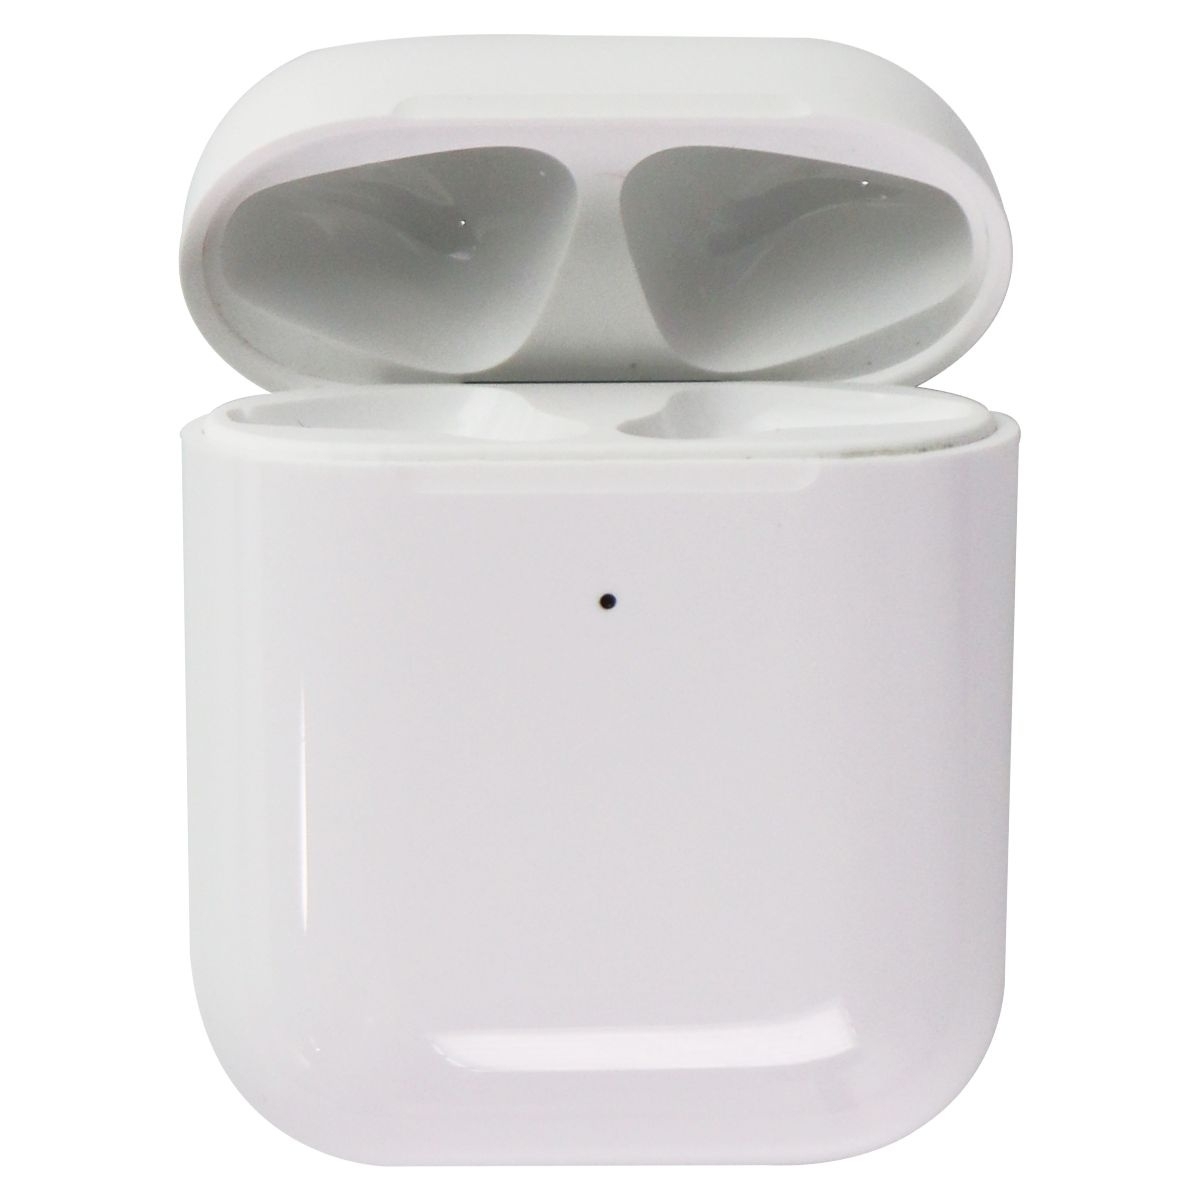 Apple AirPods with Wireless Charging Case - image 2 of 3